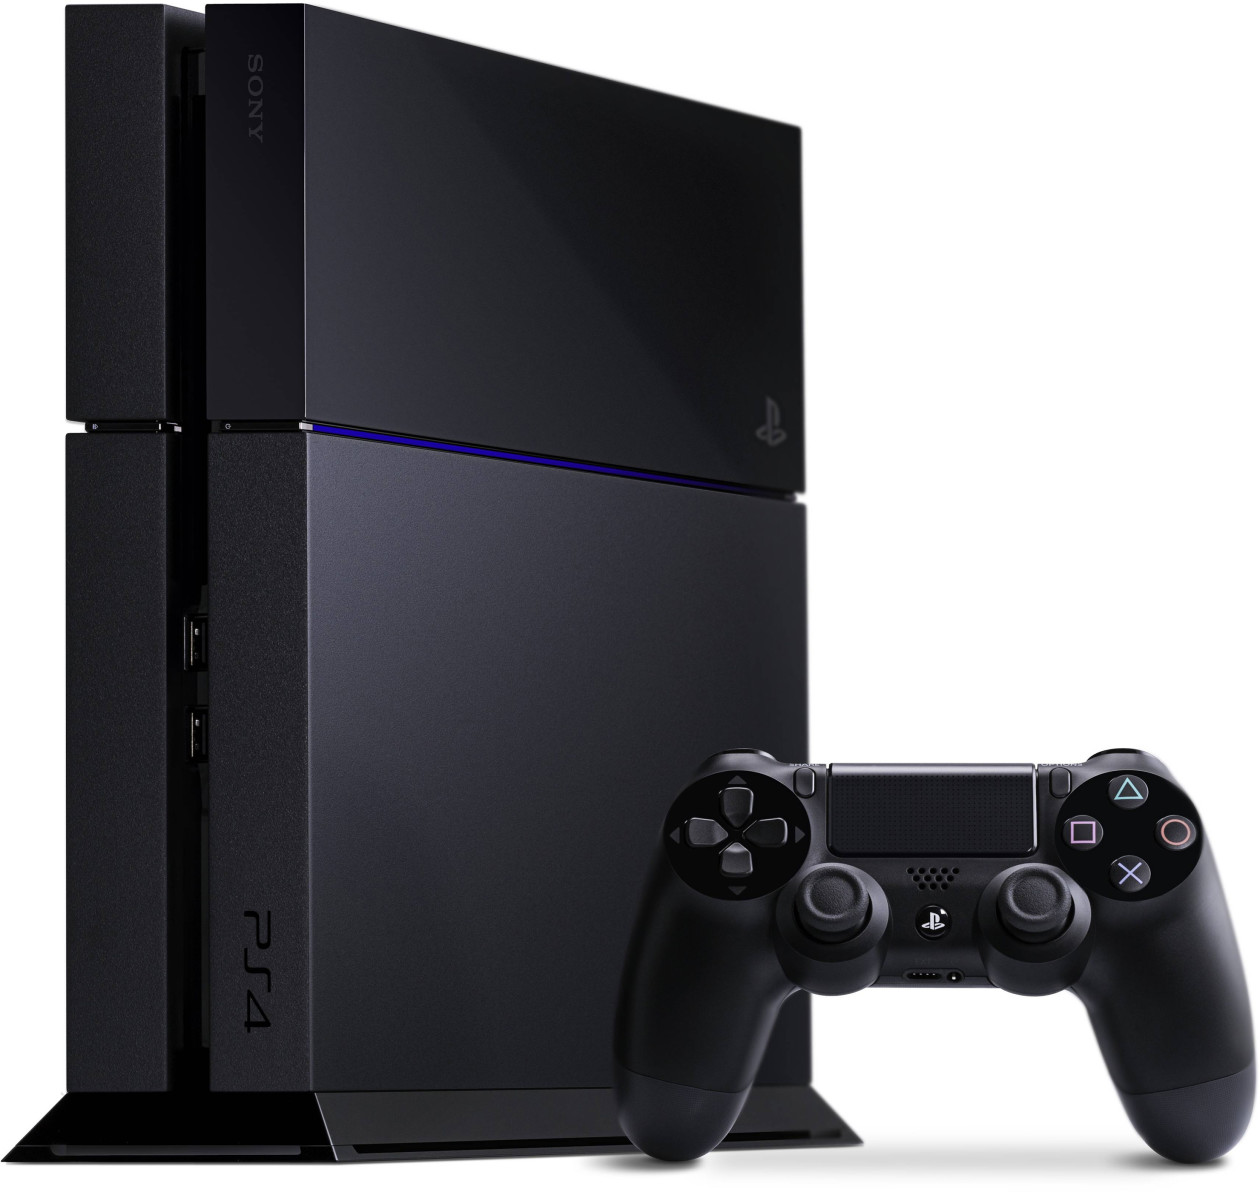 PlayStation 4 update now lets you play remotely on Macs and PCs